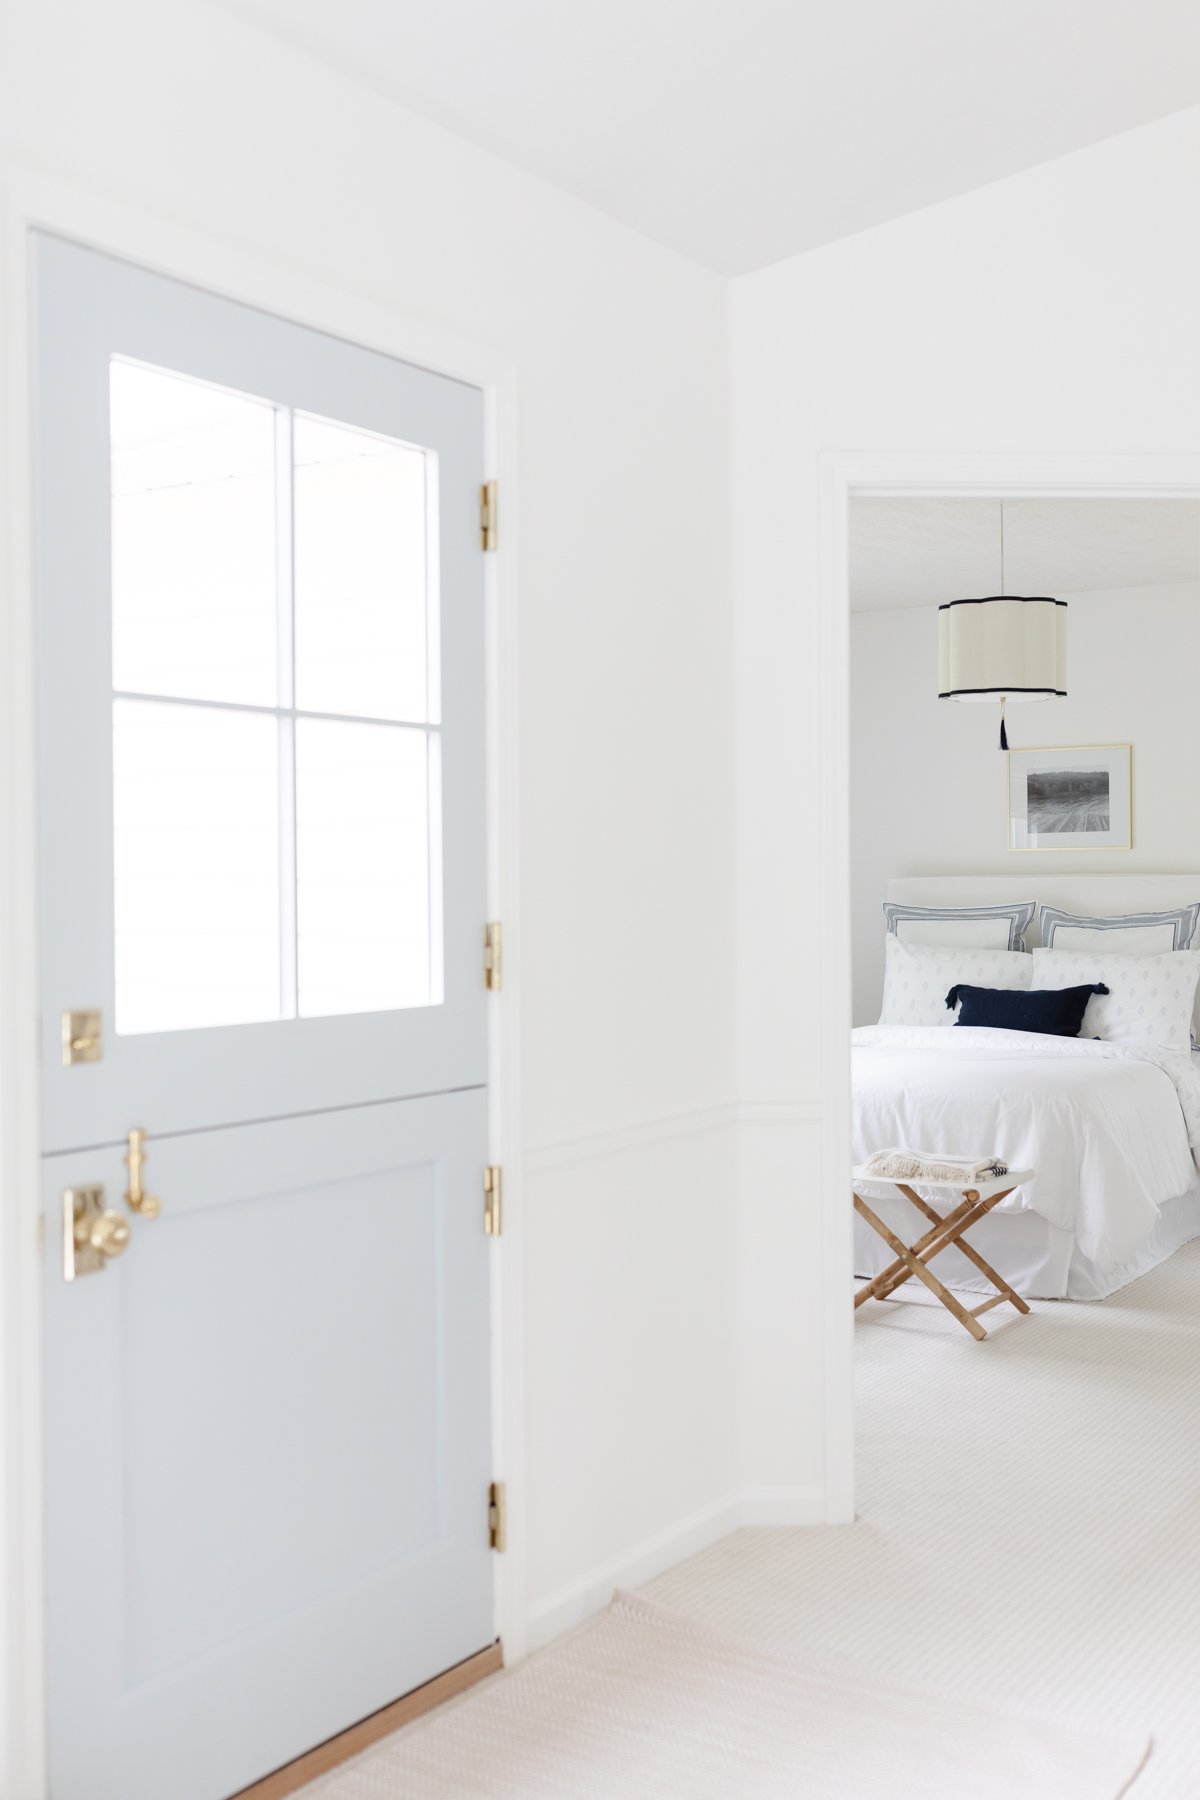 A light and airy bedroom viewed through an open door with a frosted glass pane showcases the best paint for trim, enhancing its aesthetic appeal.